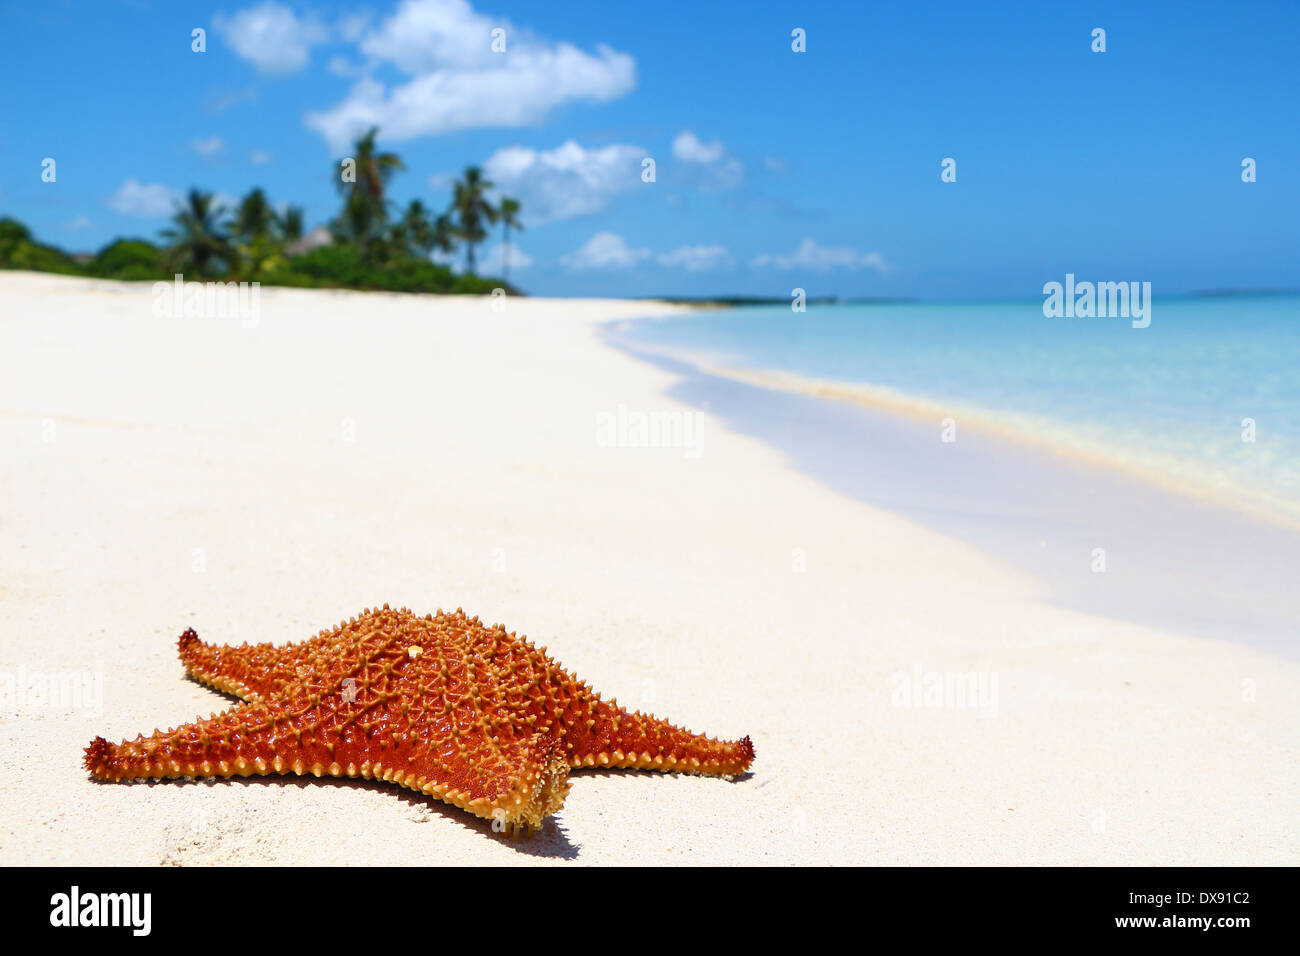 A red starfish laying on a white sand beach. Stock Photo